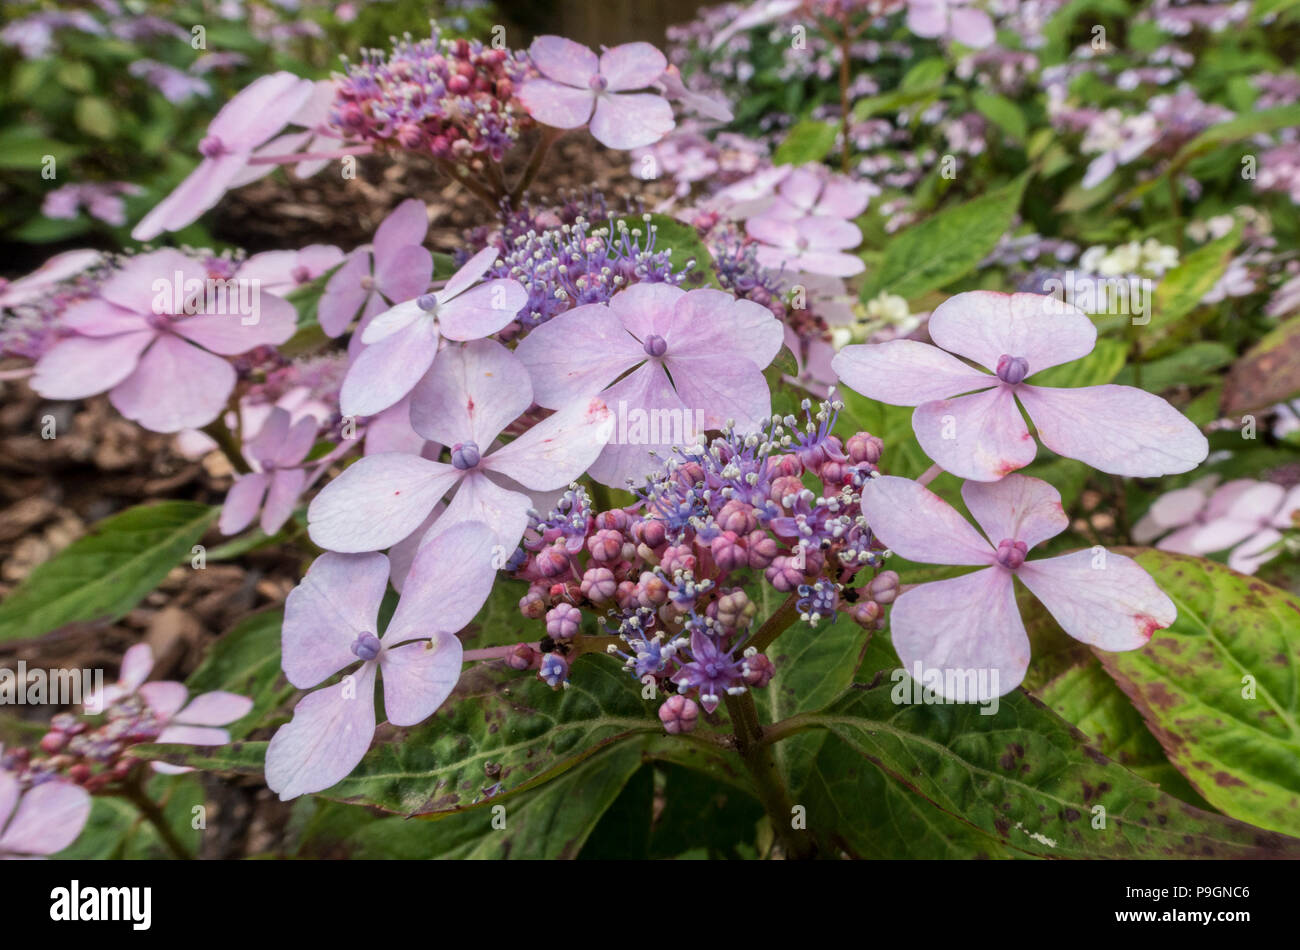 Lacecap hydrangea macrophylla Mariessi Perfecta, normally blue, but here in pink due to soil alkalinity. Stock Photo